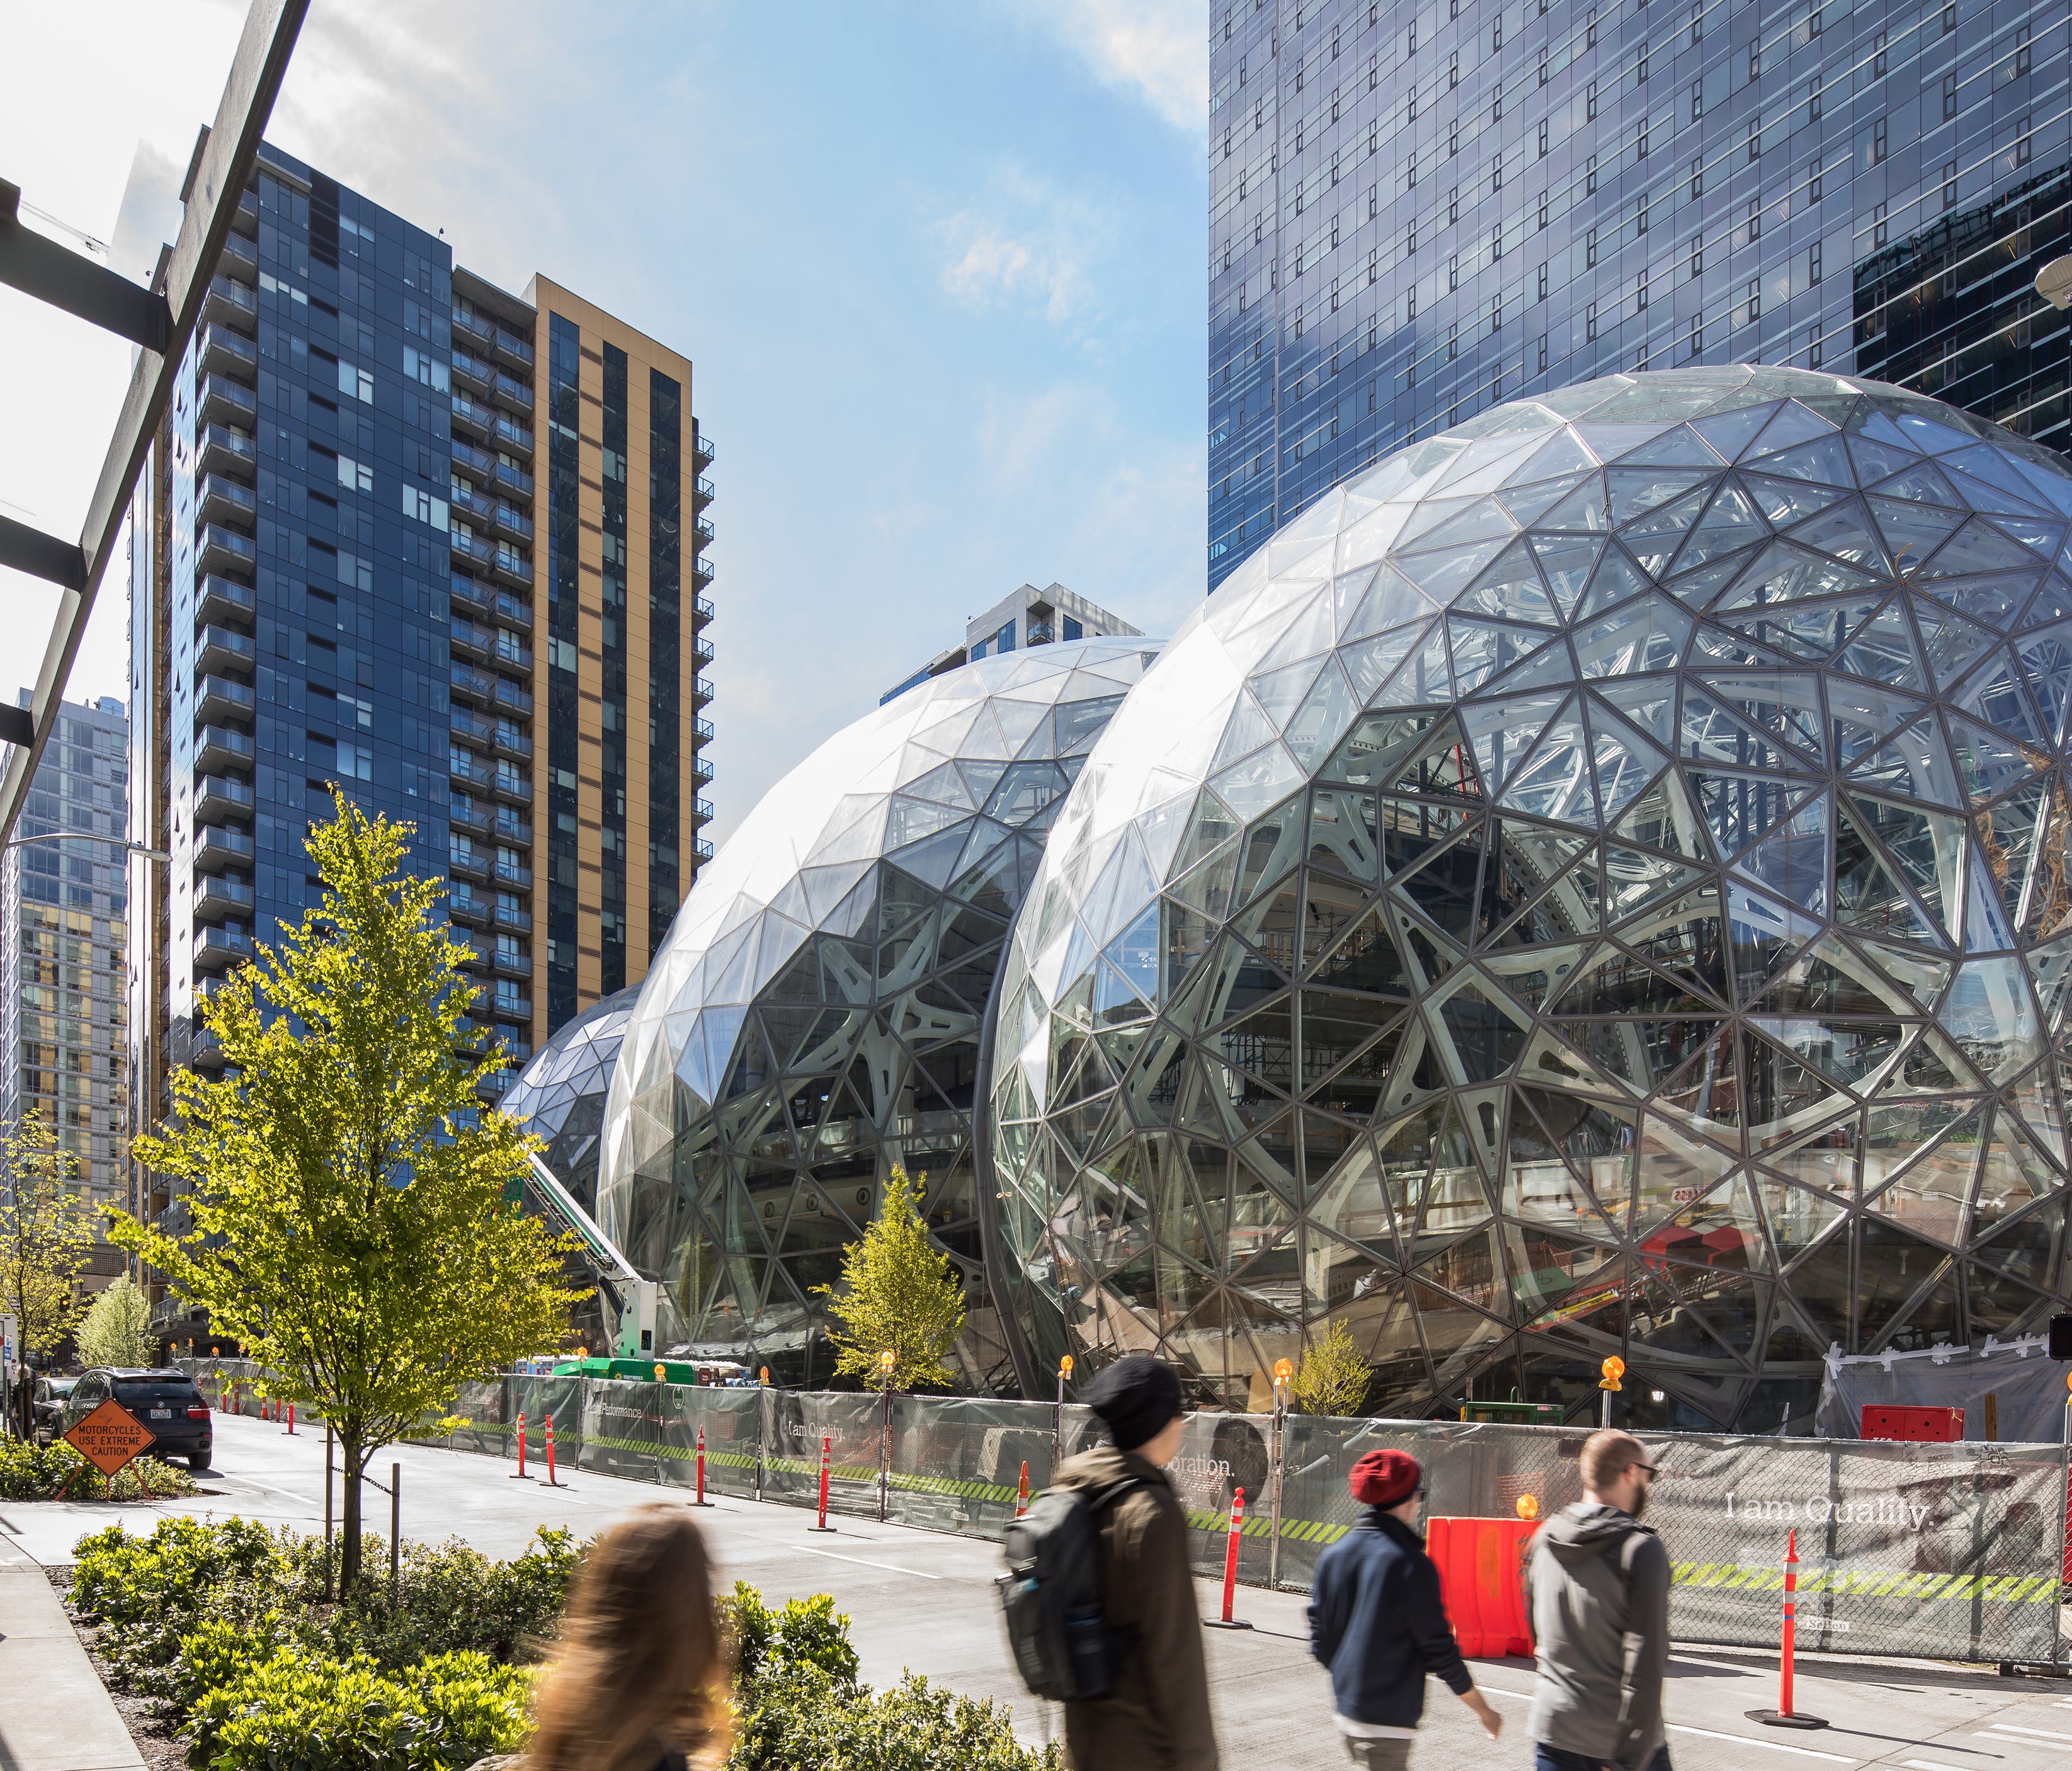 The striking visual form and unconventional function have set the Amazon Spheres on the path to becoming a Seattle icon to rival the Space Needle. The spheres received a 2016 AIA Seattle Honor Awards Honorable Mention, as well as taking second place 